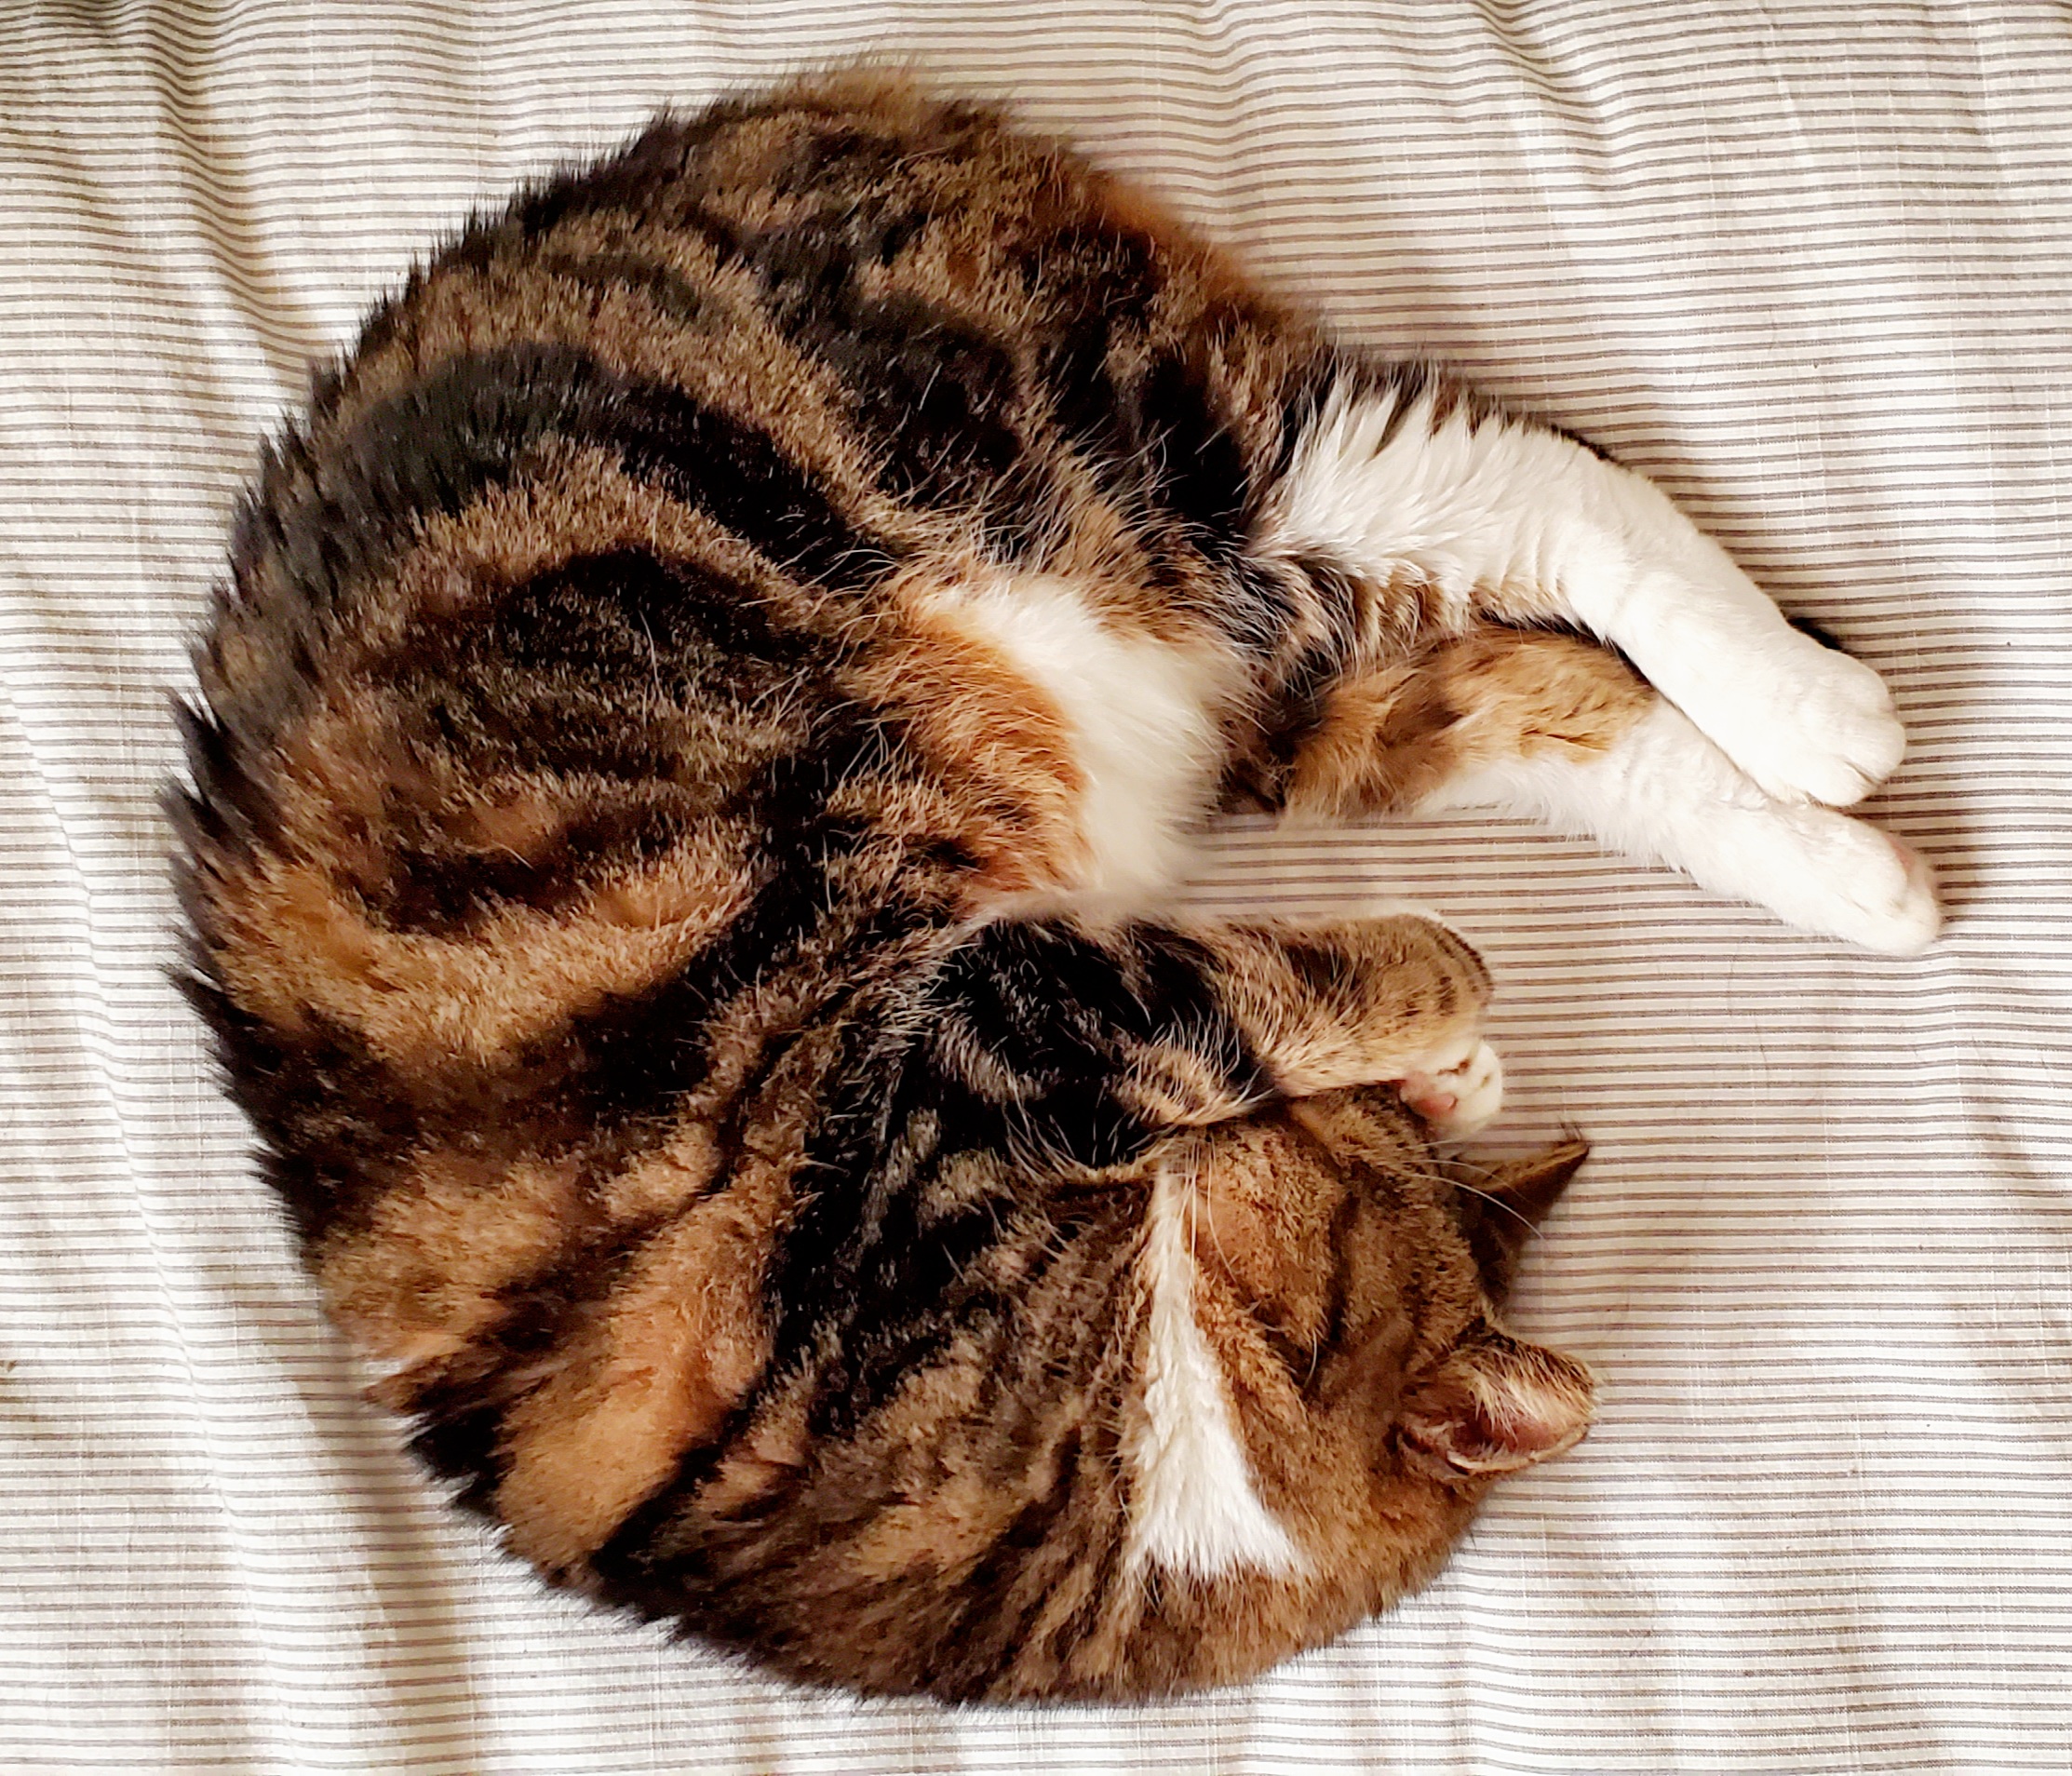 A super cute tabby cat is asleep and curled up like a ball on a striped comforter